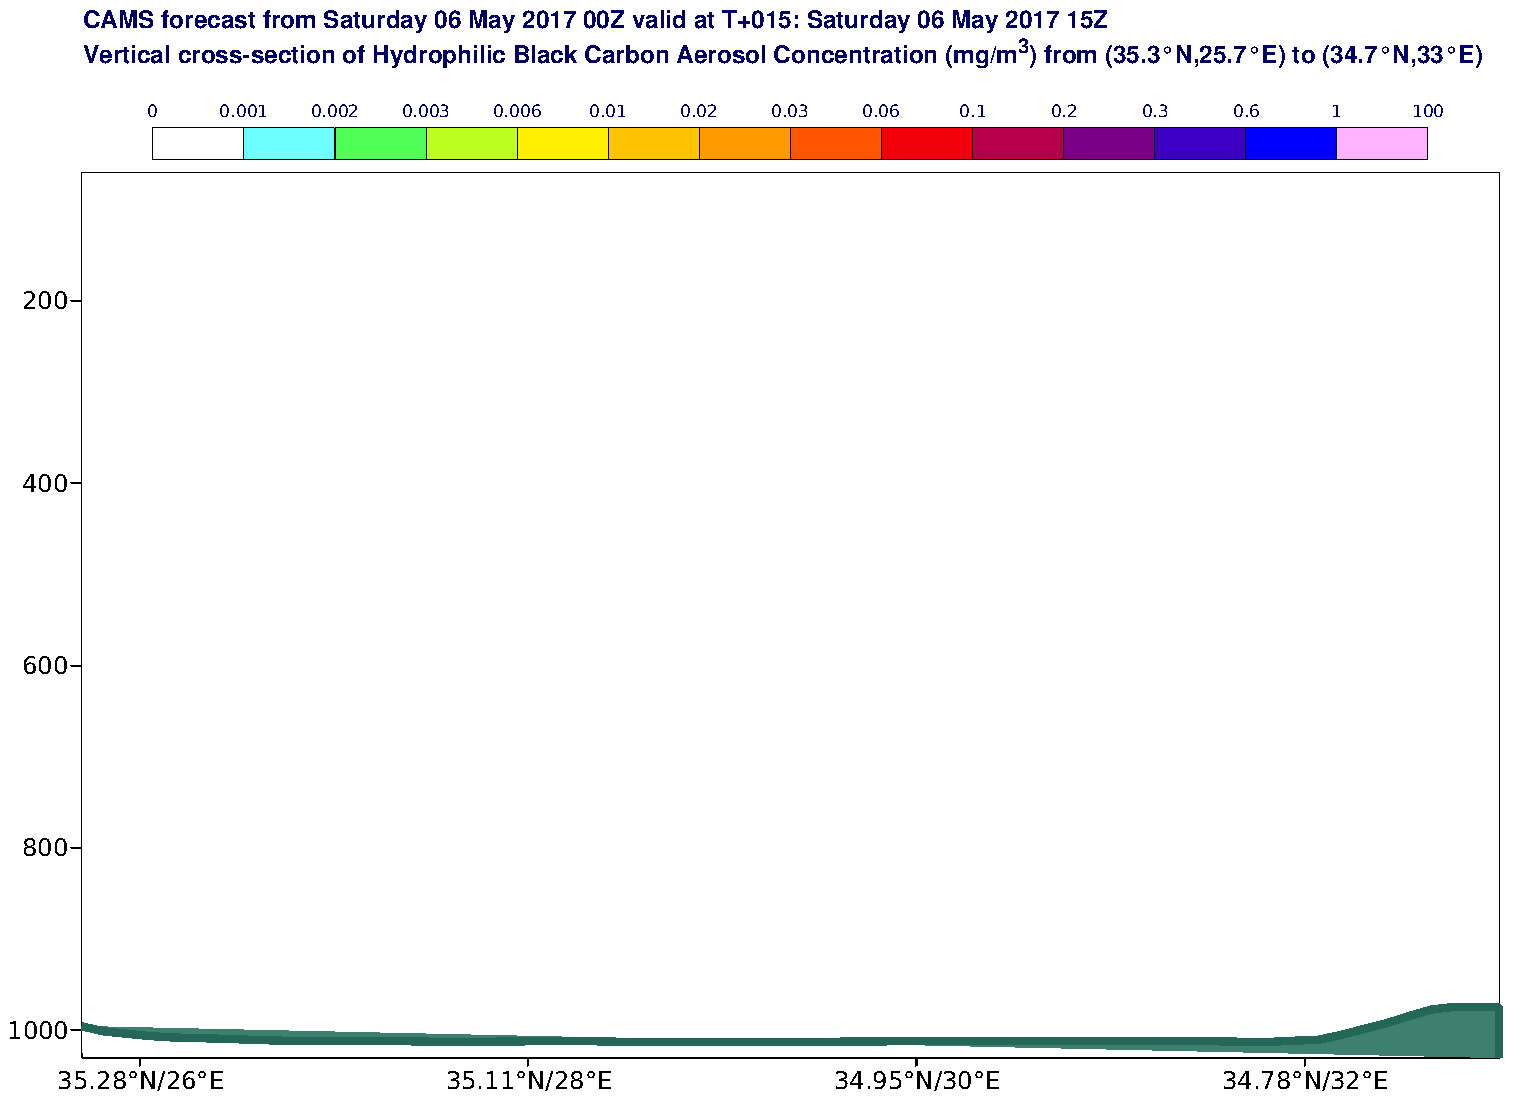 Vertical cross-section of Hydrophilic Black Carbon Aerosol Concentration (mg/m3) valid at T15 - 2017-05-06 15:00